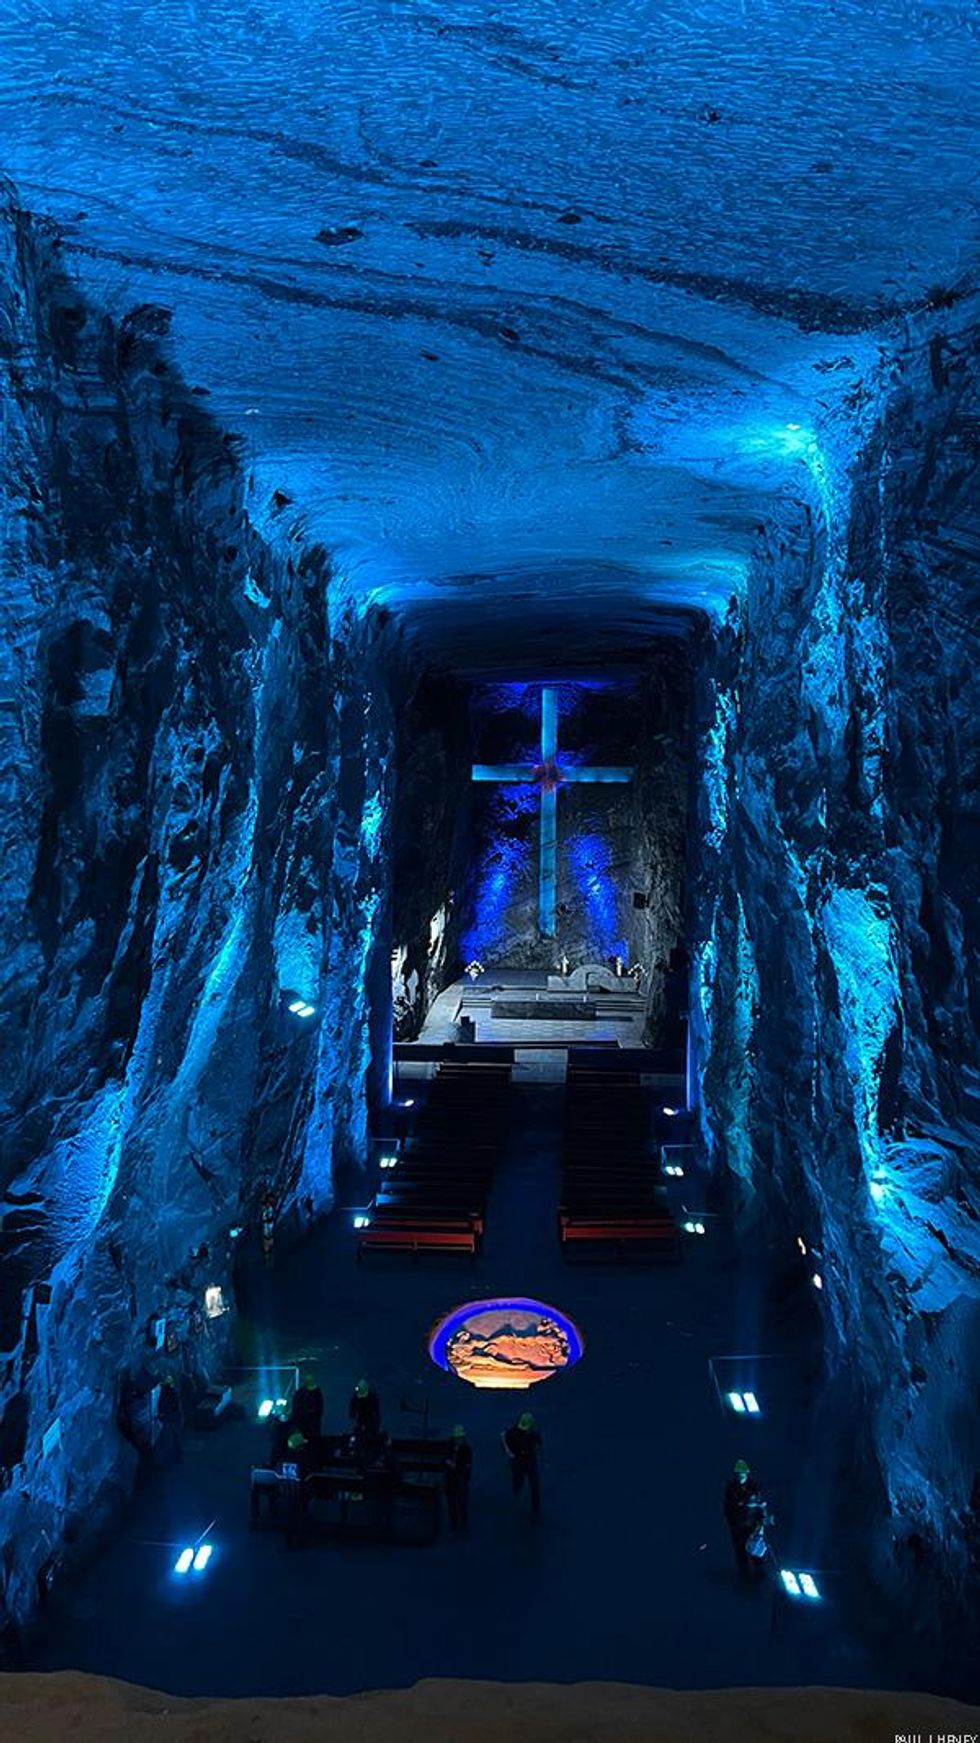 Getting an LGBTQ+ High From Dynamic Bogot\u00e1 -- the famed underground Salt Cathedral